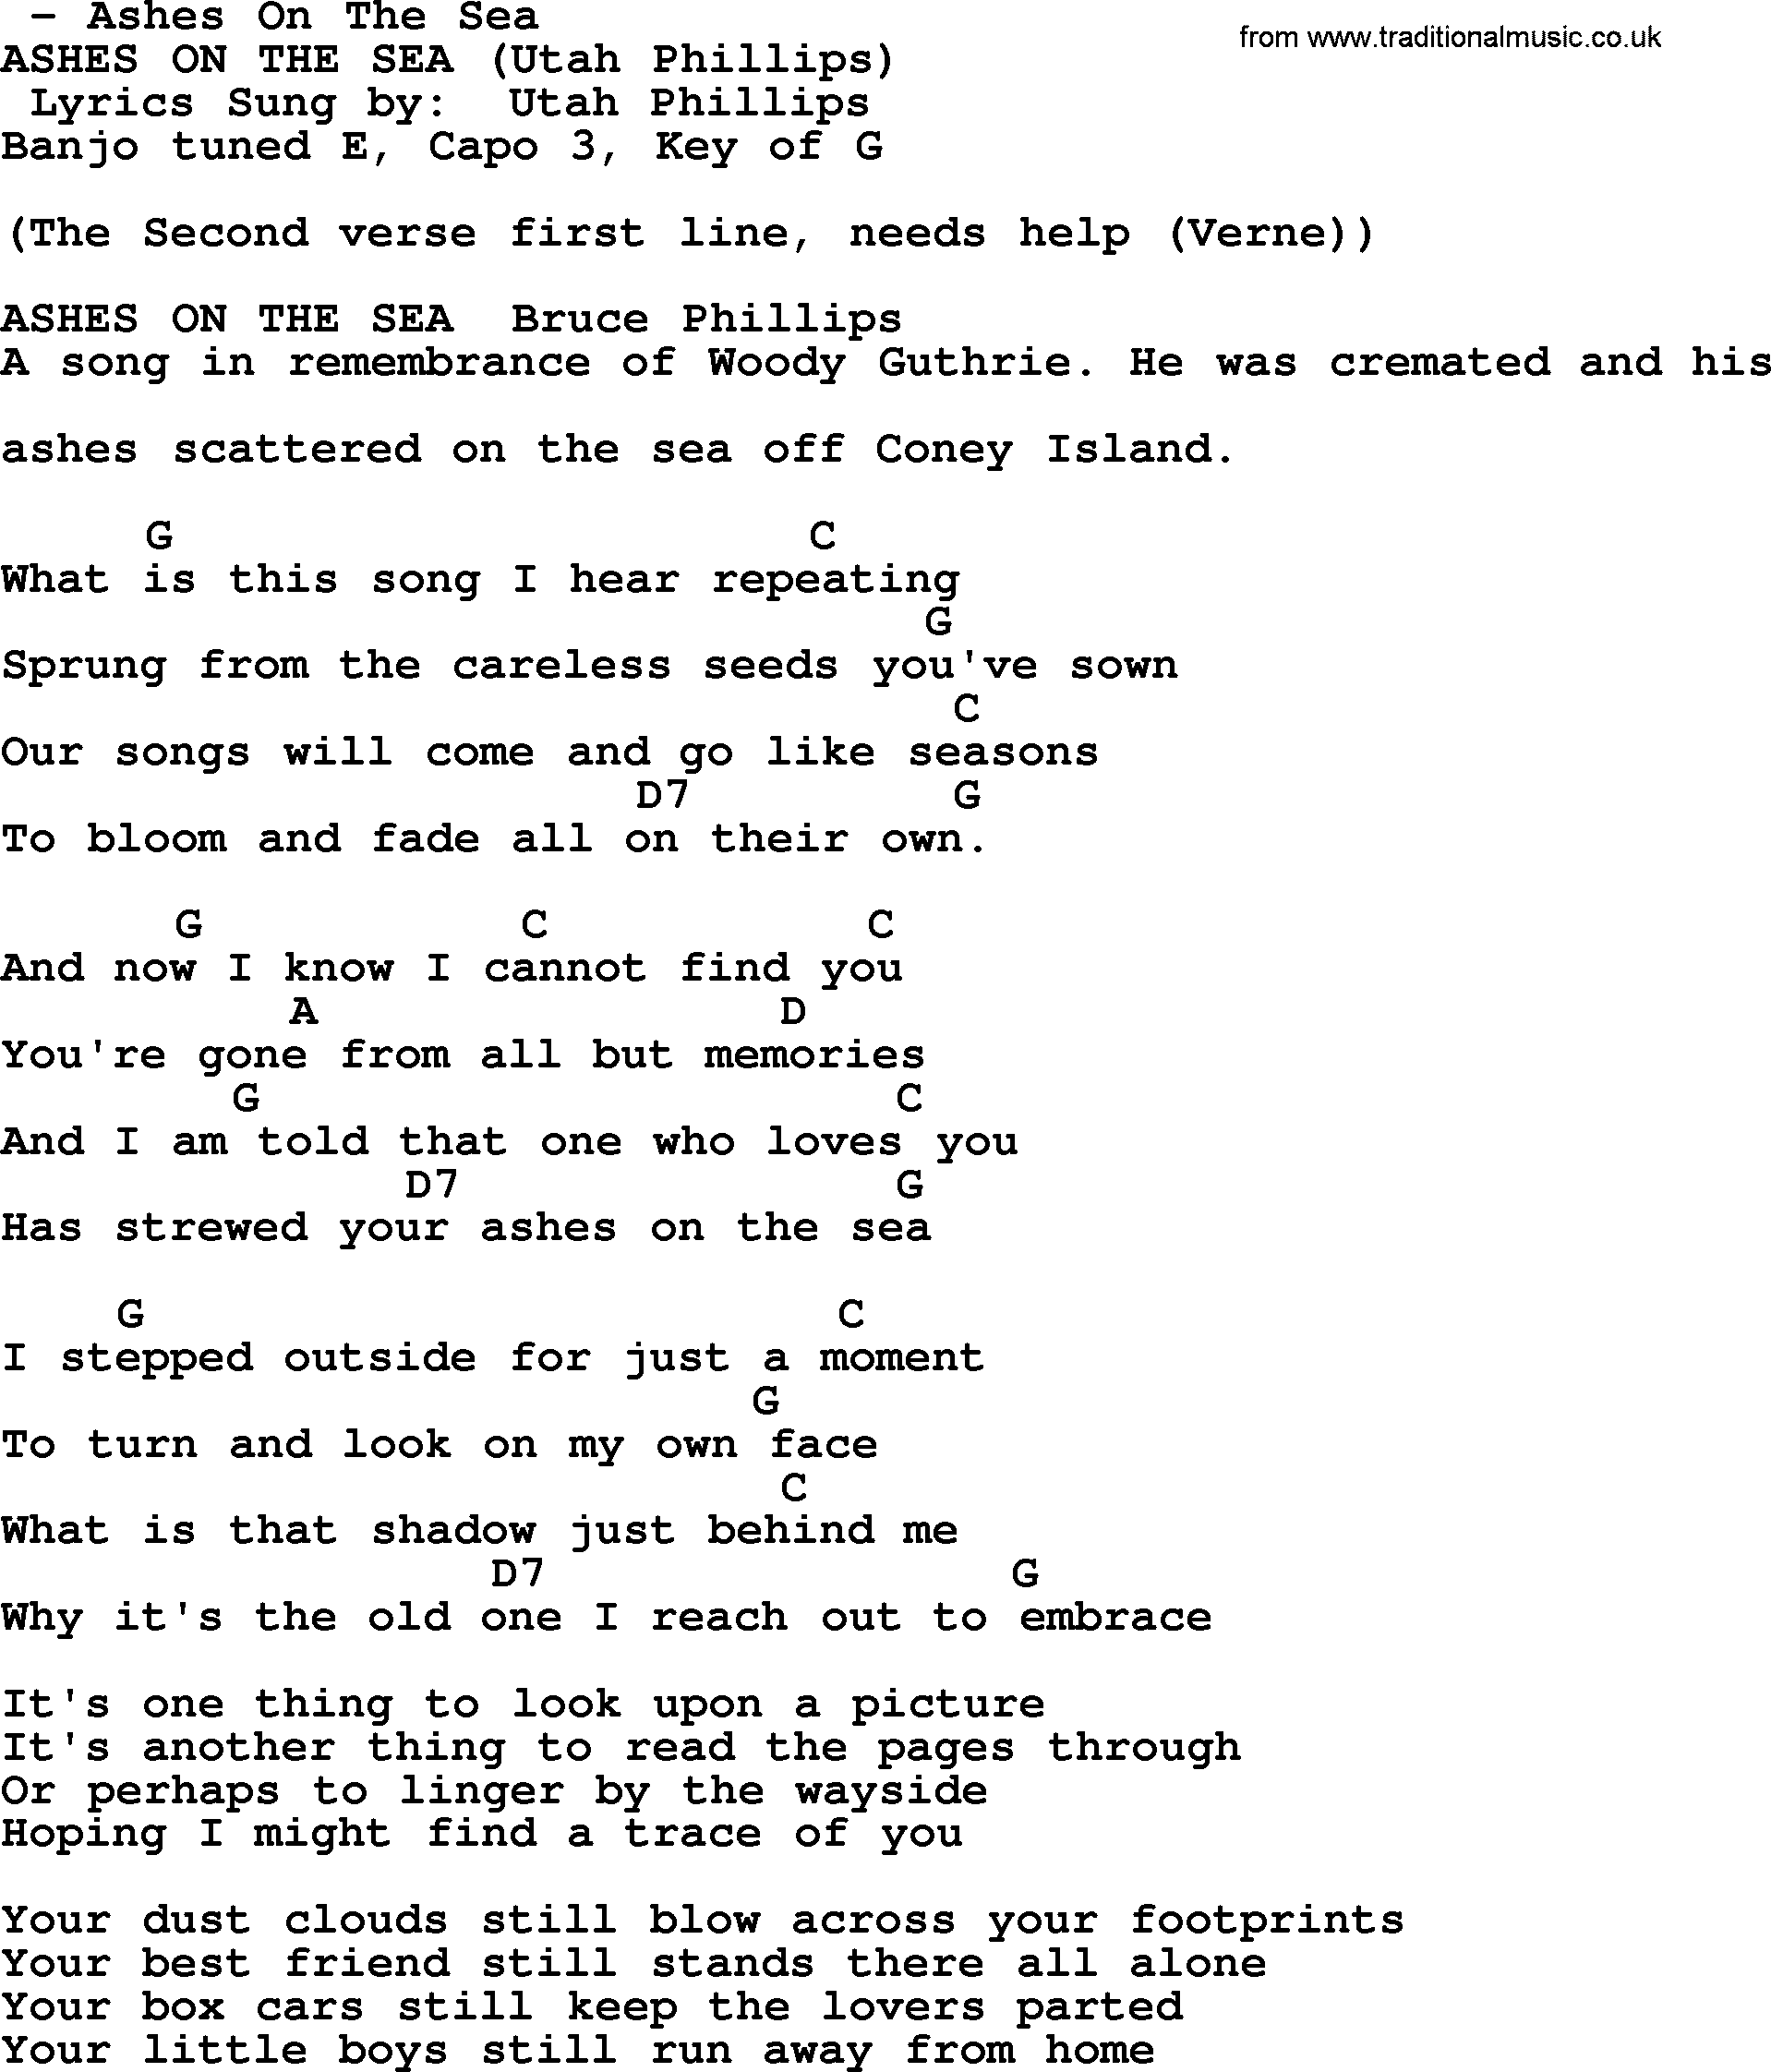 Bluegrass song: Ashes On The Sea, lyrics and chords